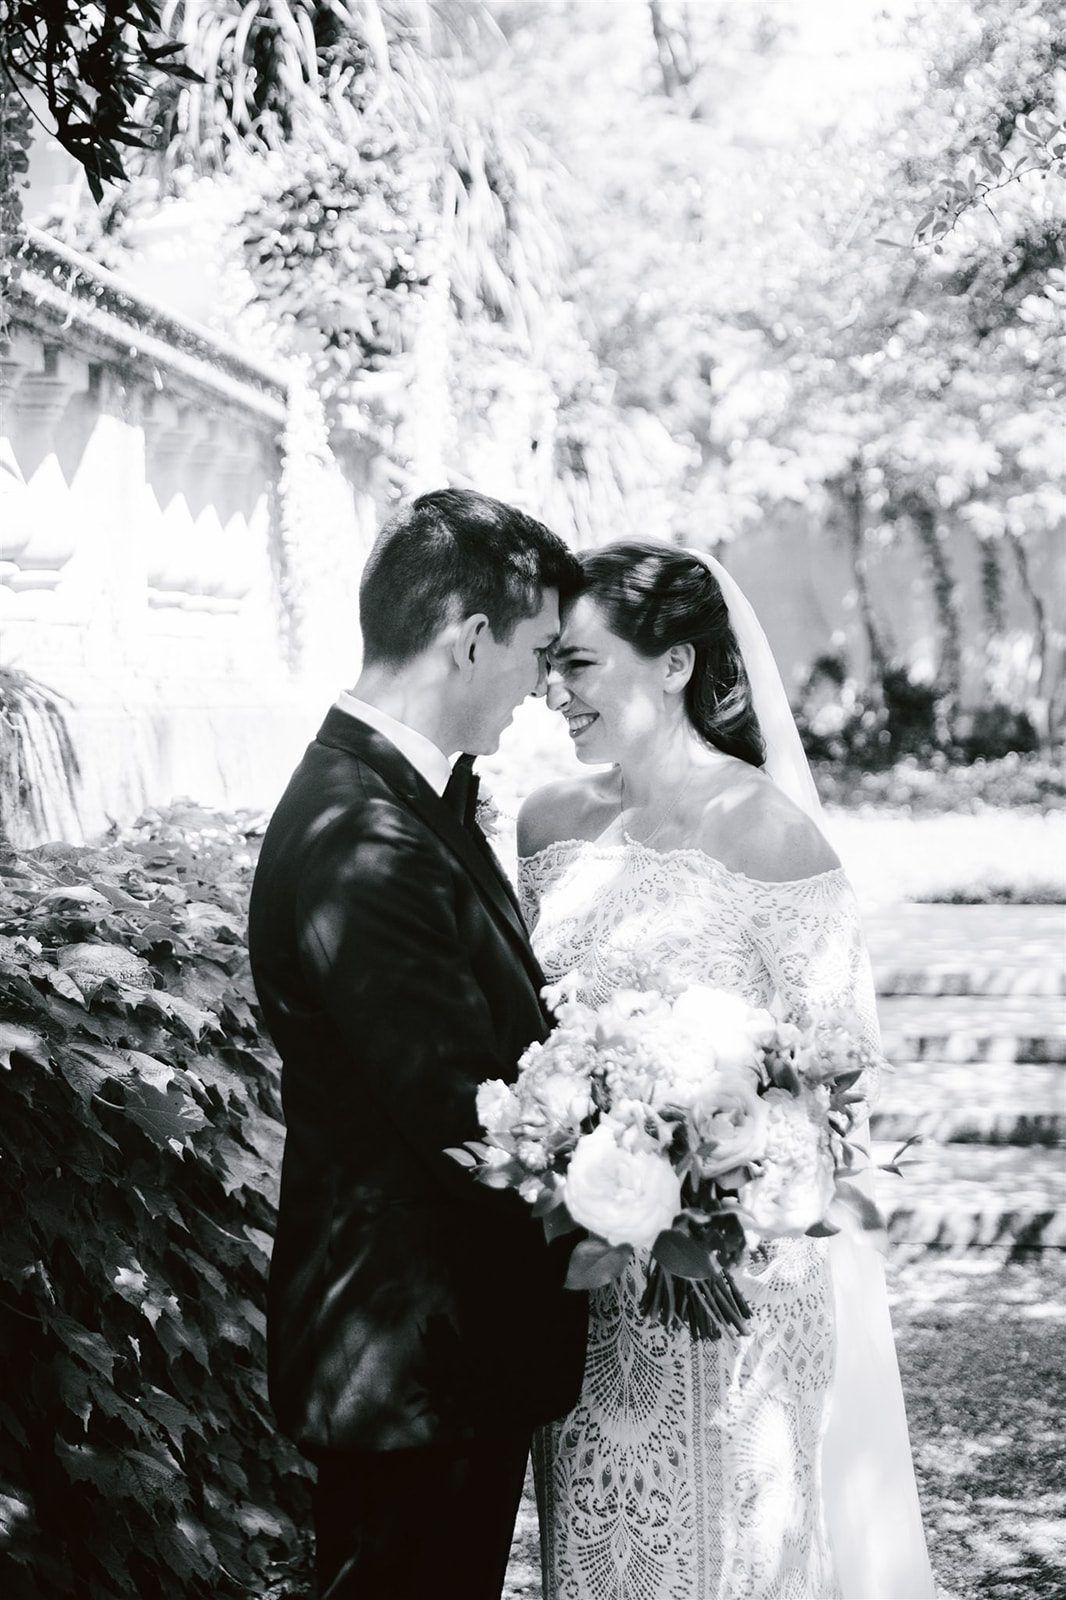 Captivating snapshots of the bride and groom amidst the lush surroundings of the Art Institute gardens.